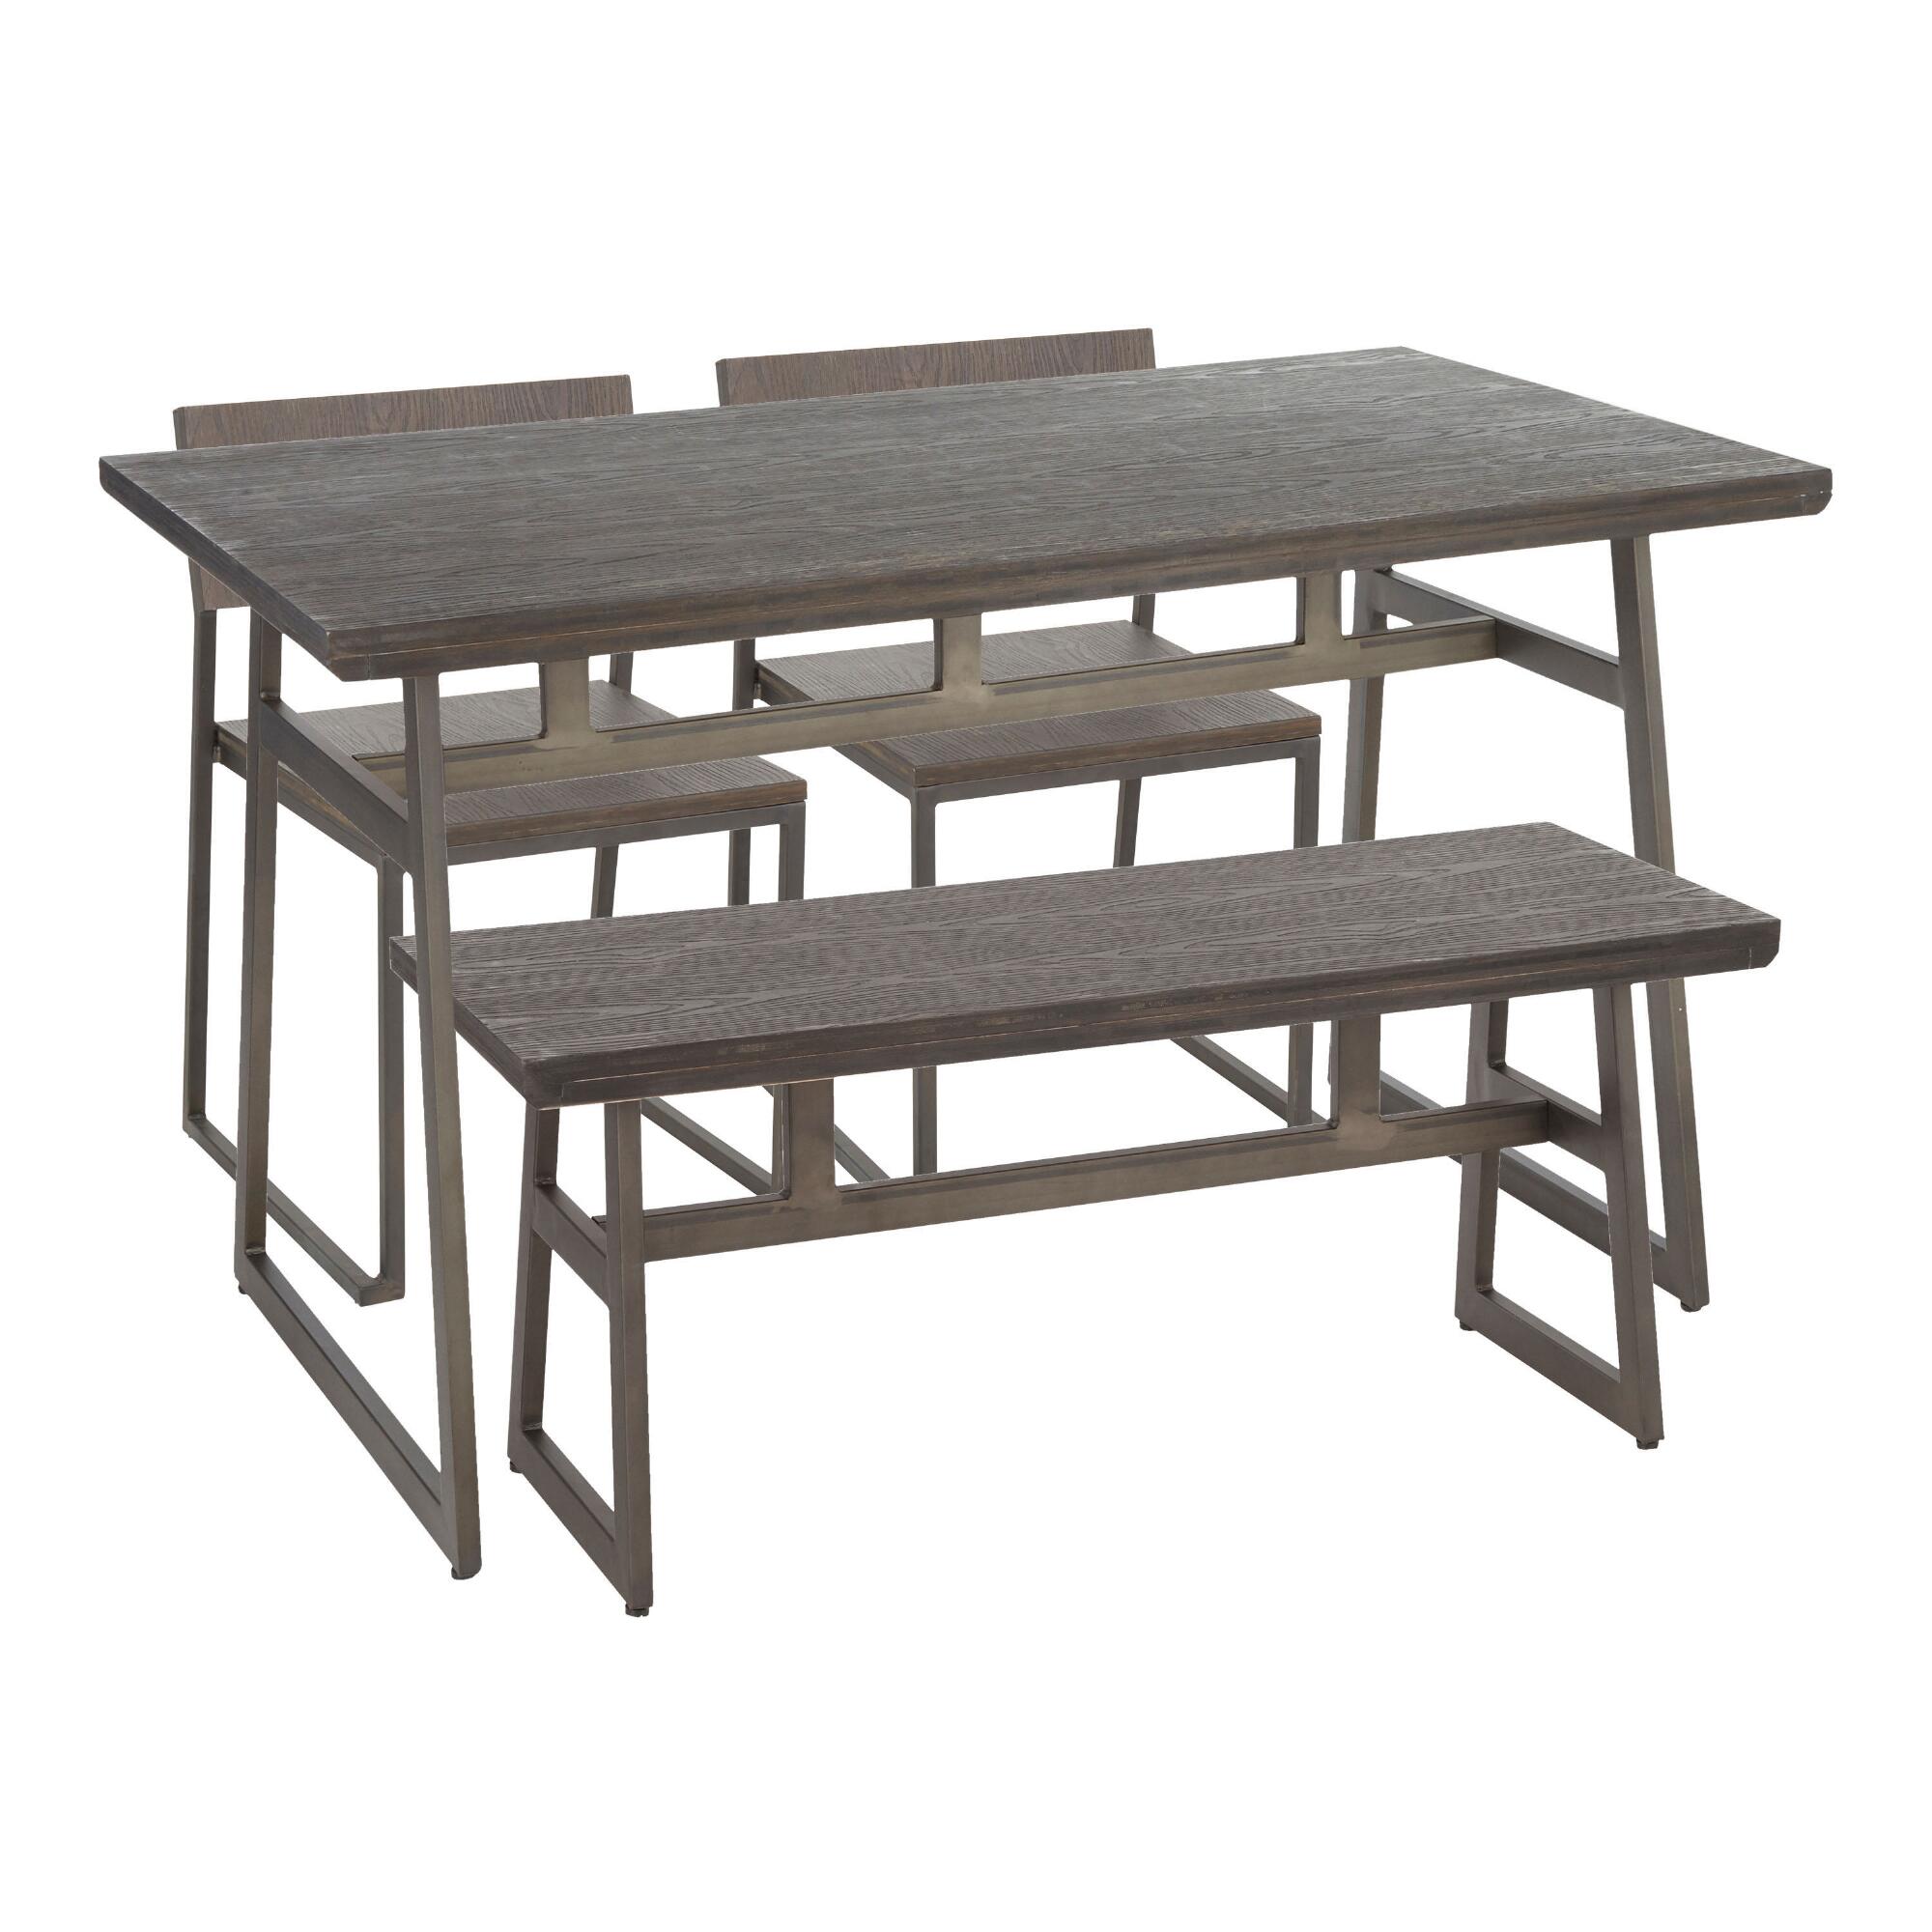 Wood and Metal Industrial Tristan Dining Collection by World Market